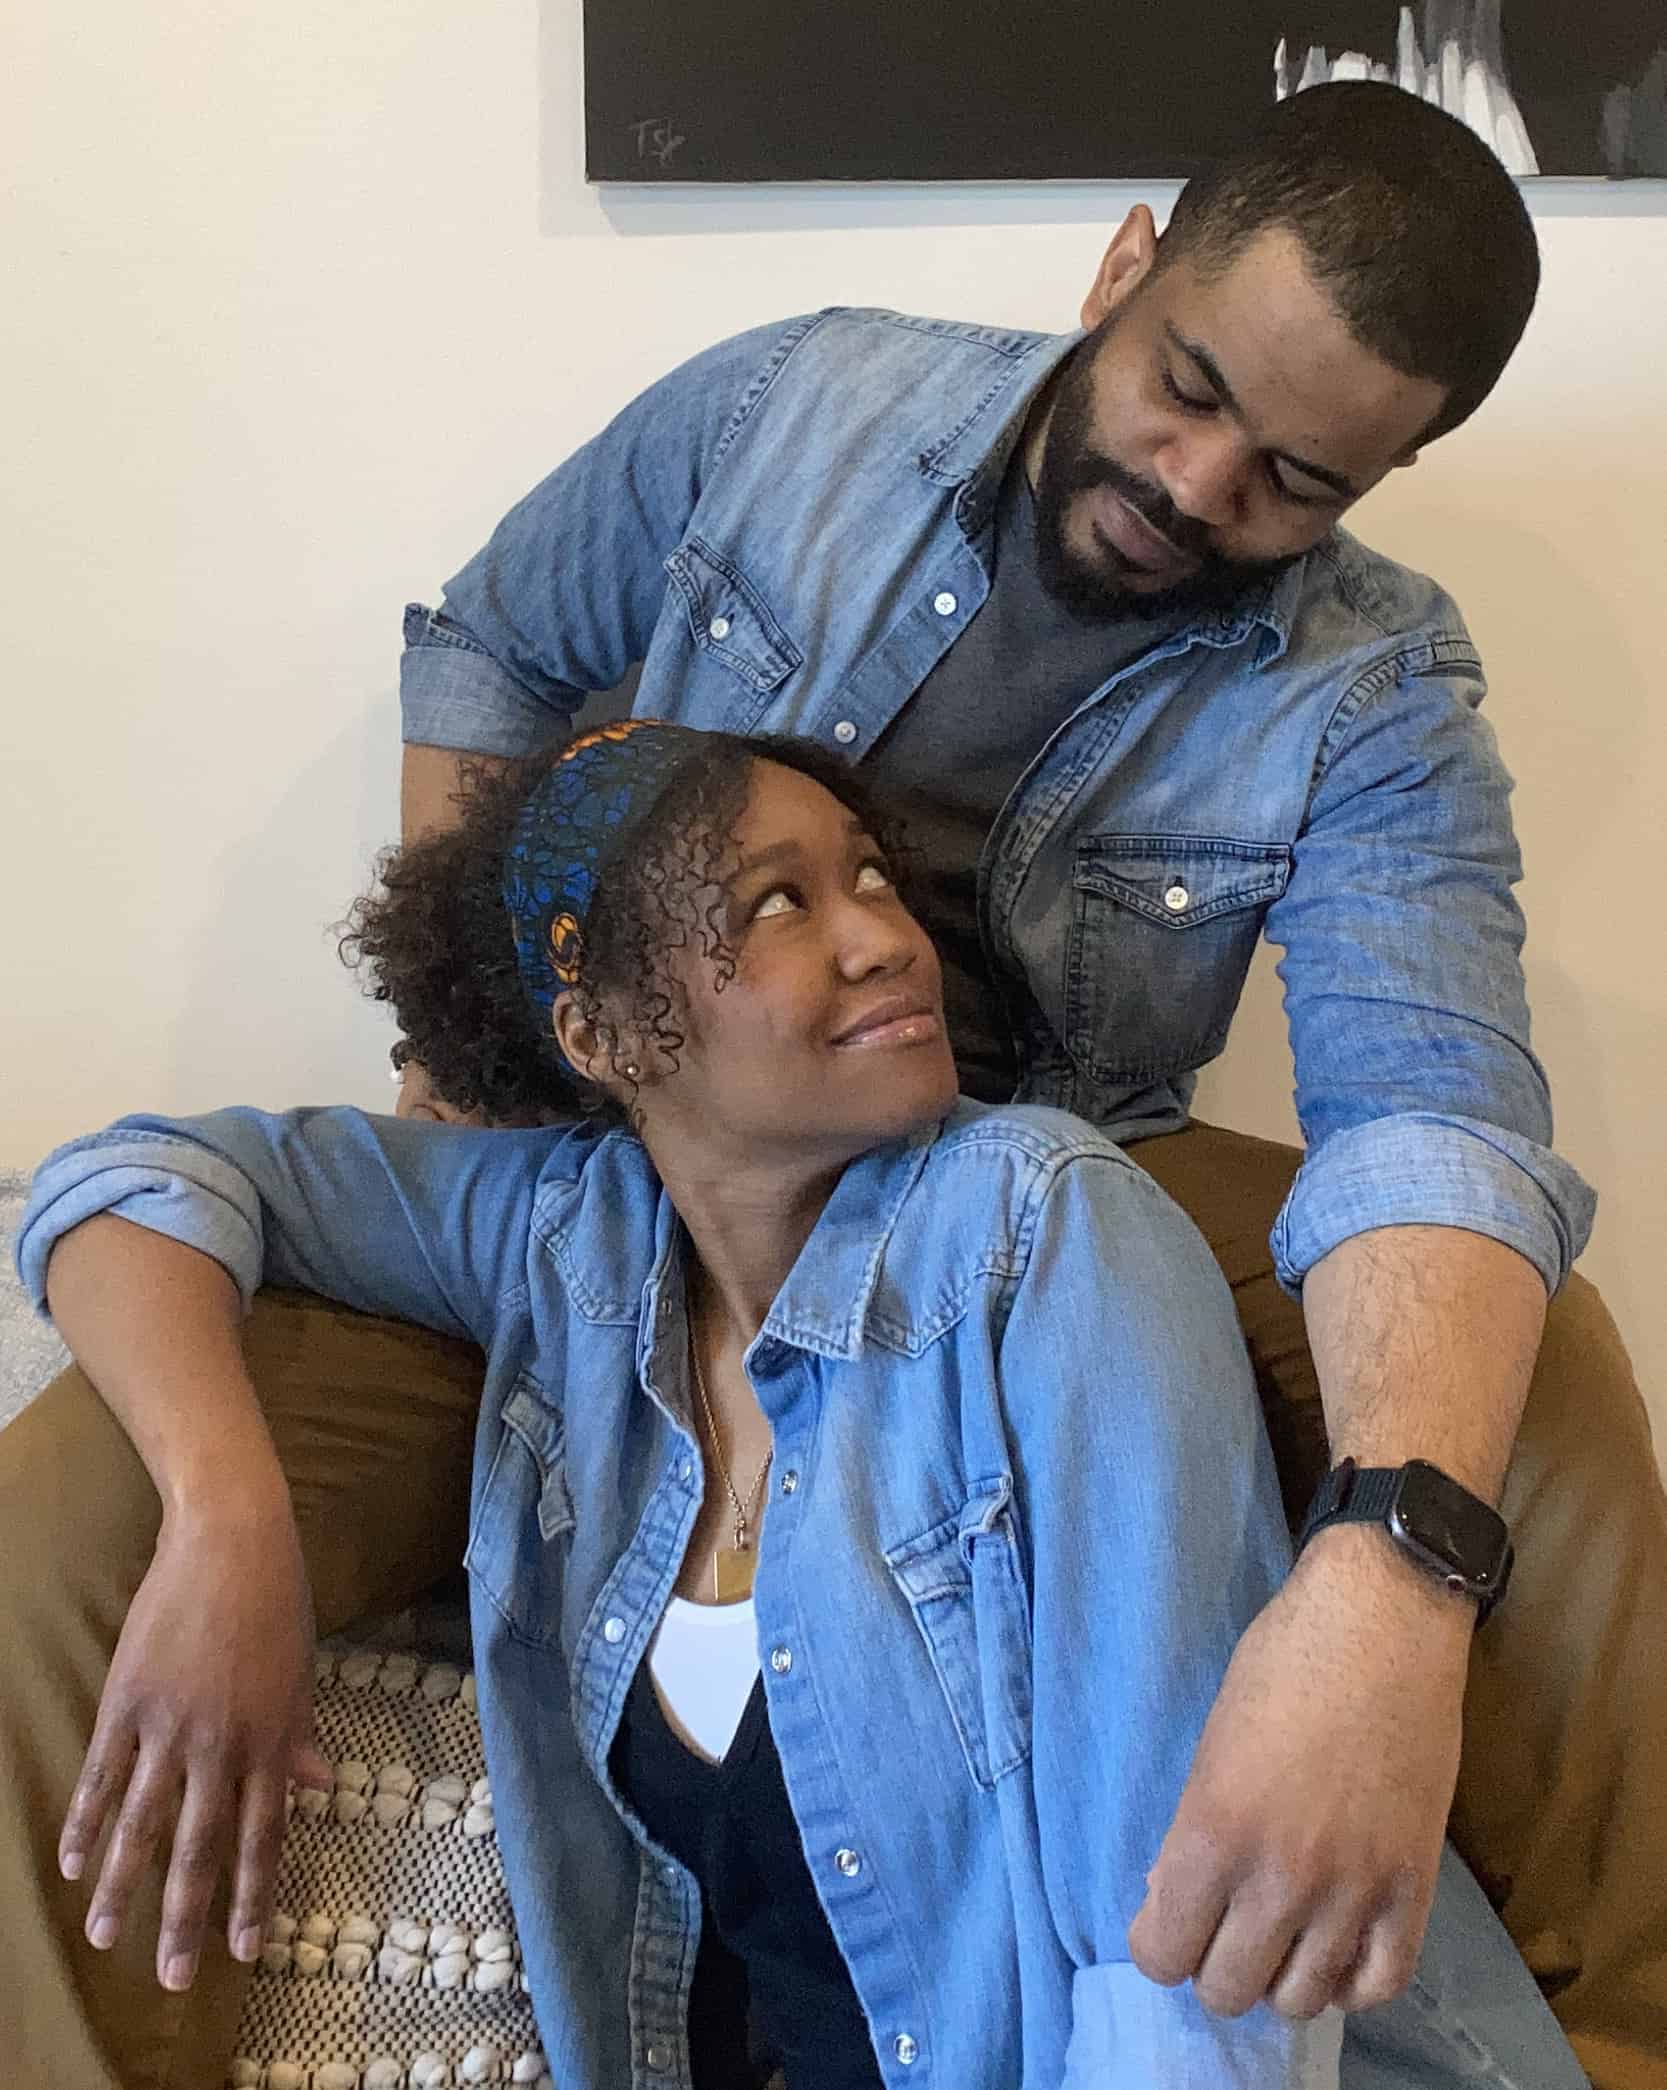 Boston-based actors Elle Borders and Brandon G. Green, a couple in real life as well as on stage, sit together on the couch as they rehearse for The Light with WAM Theatre. Press photo courtesy of the actors and WAM.